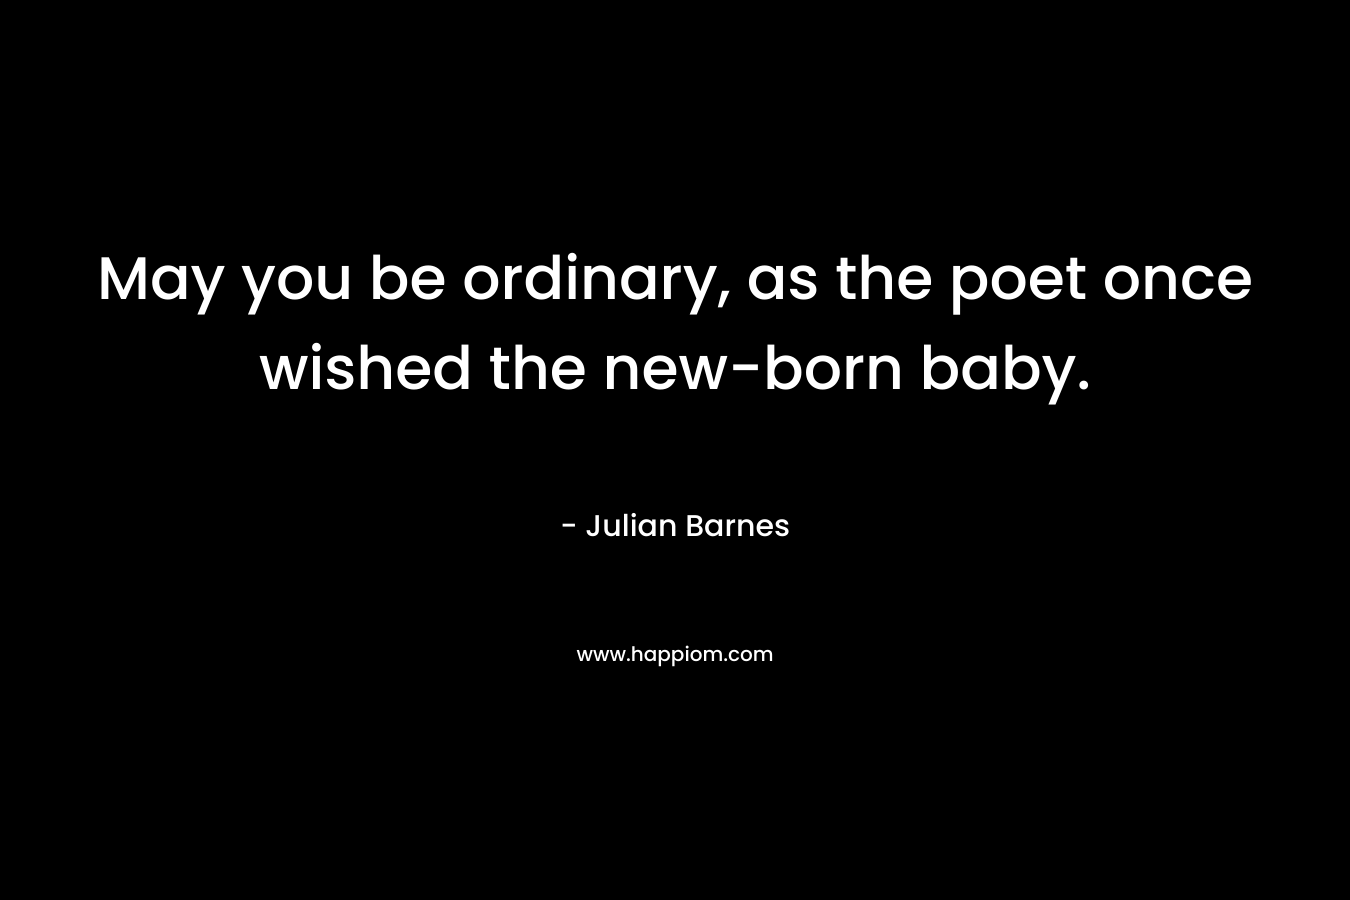 May you be ordinary, as the poet once wished the new-born baby. – Julian Barnes